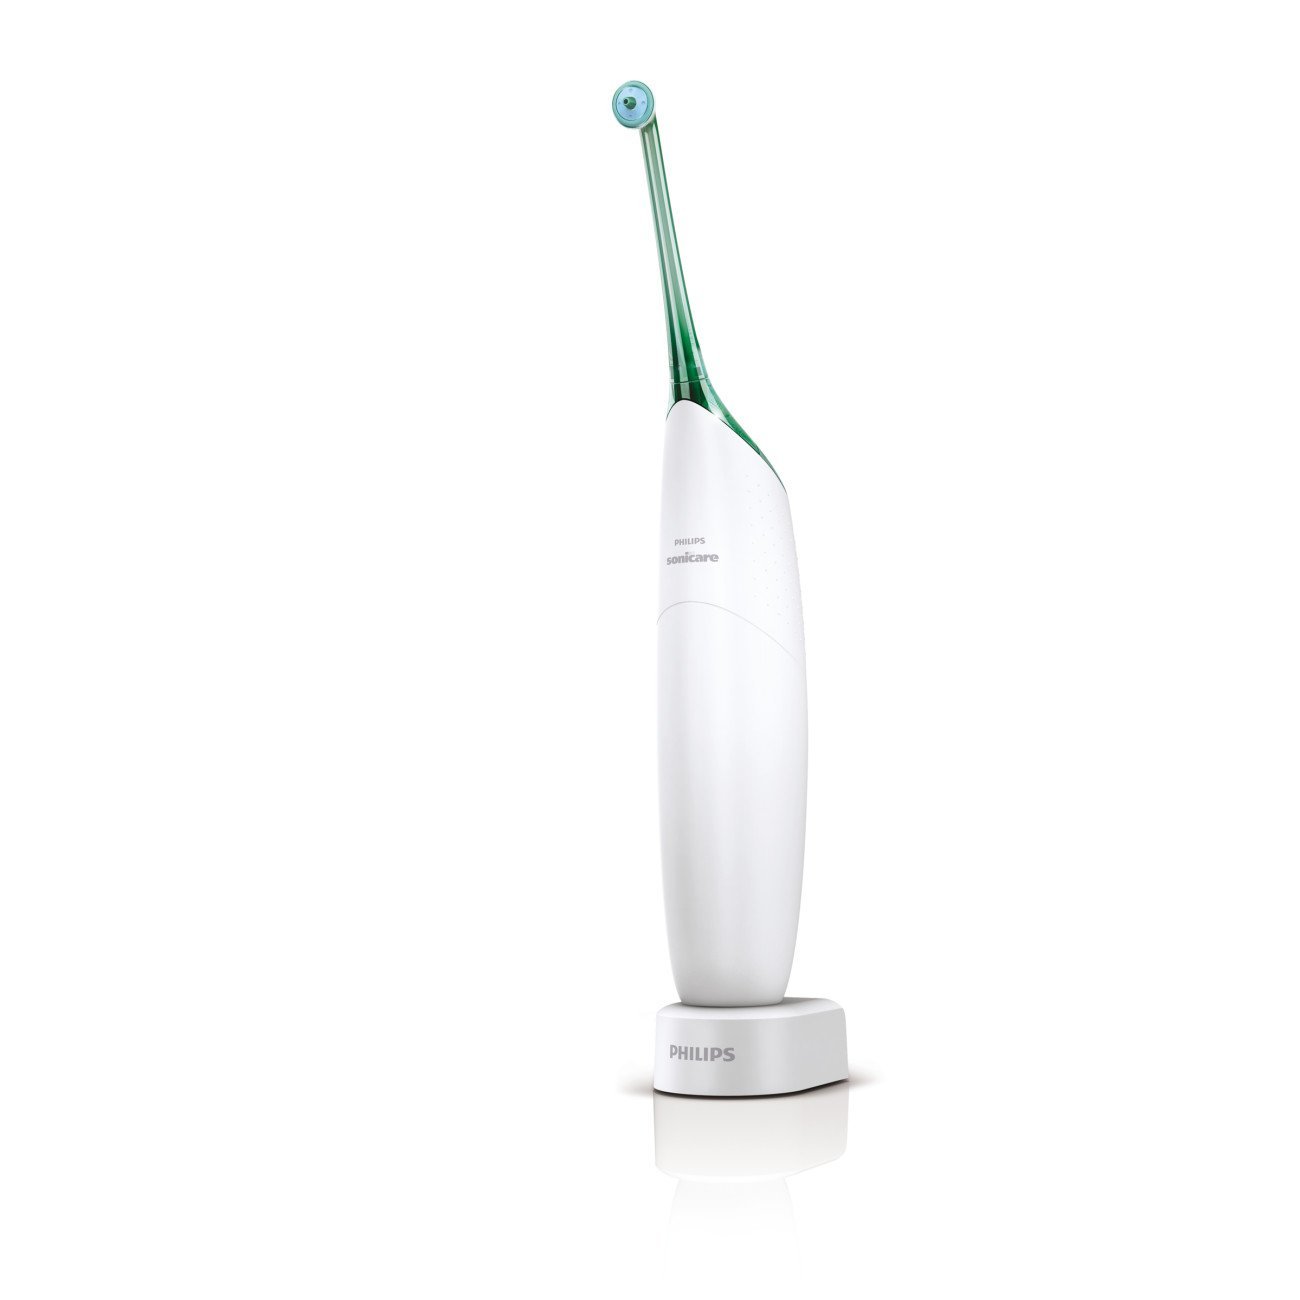 Philips Sonicare AirFloss rechargeable electric flosser for $35